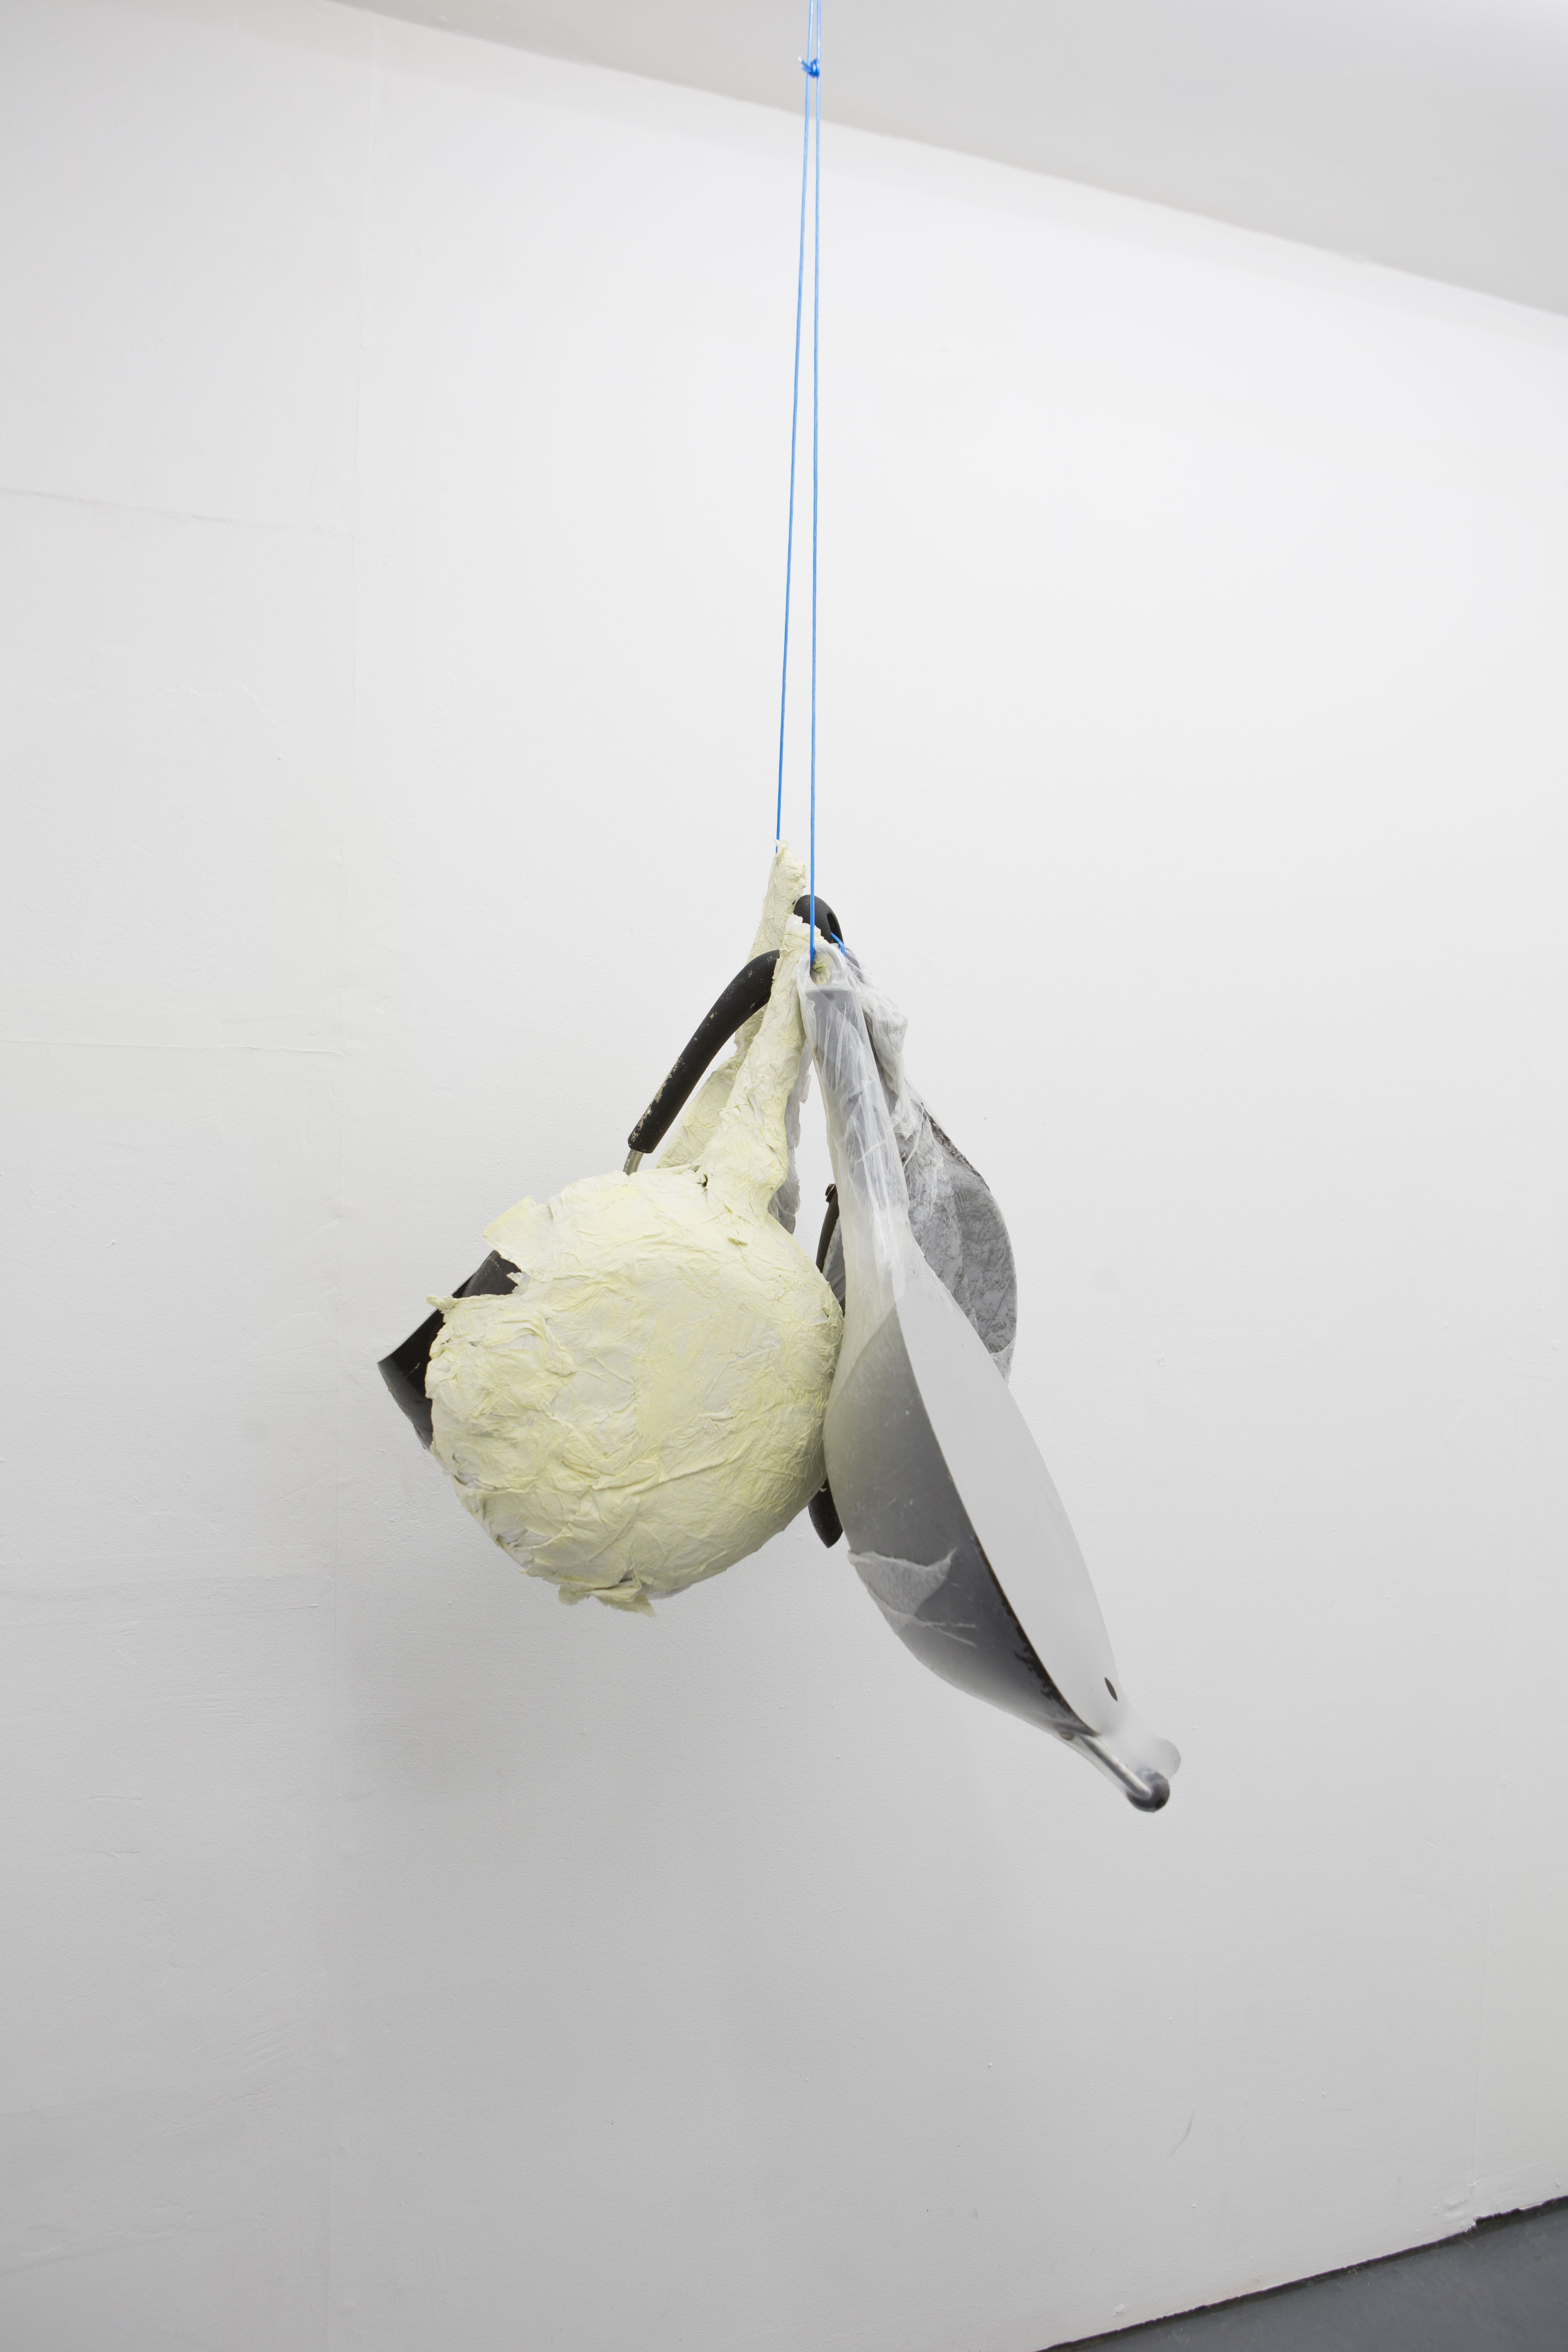 Thomas Greig Frying pans (2018); Dimensions variable; Frying pans, dust, plastic, tissue, acrylic paint, wire.